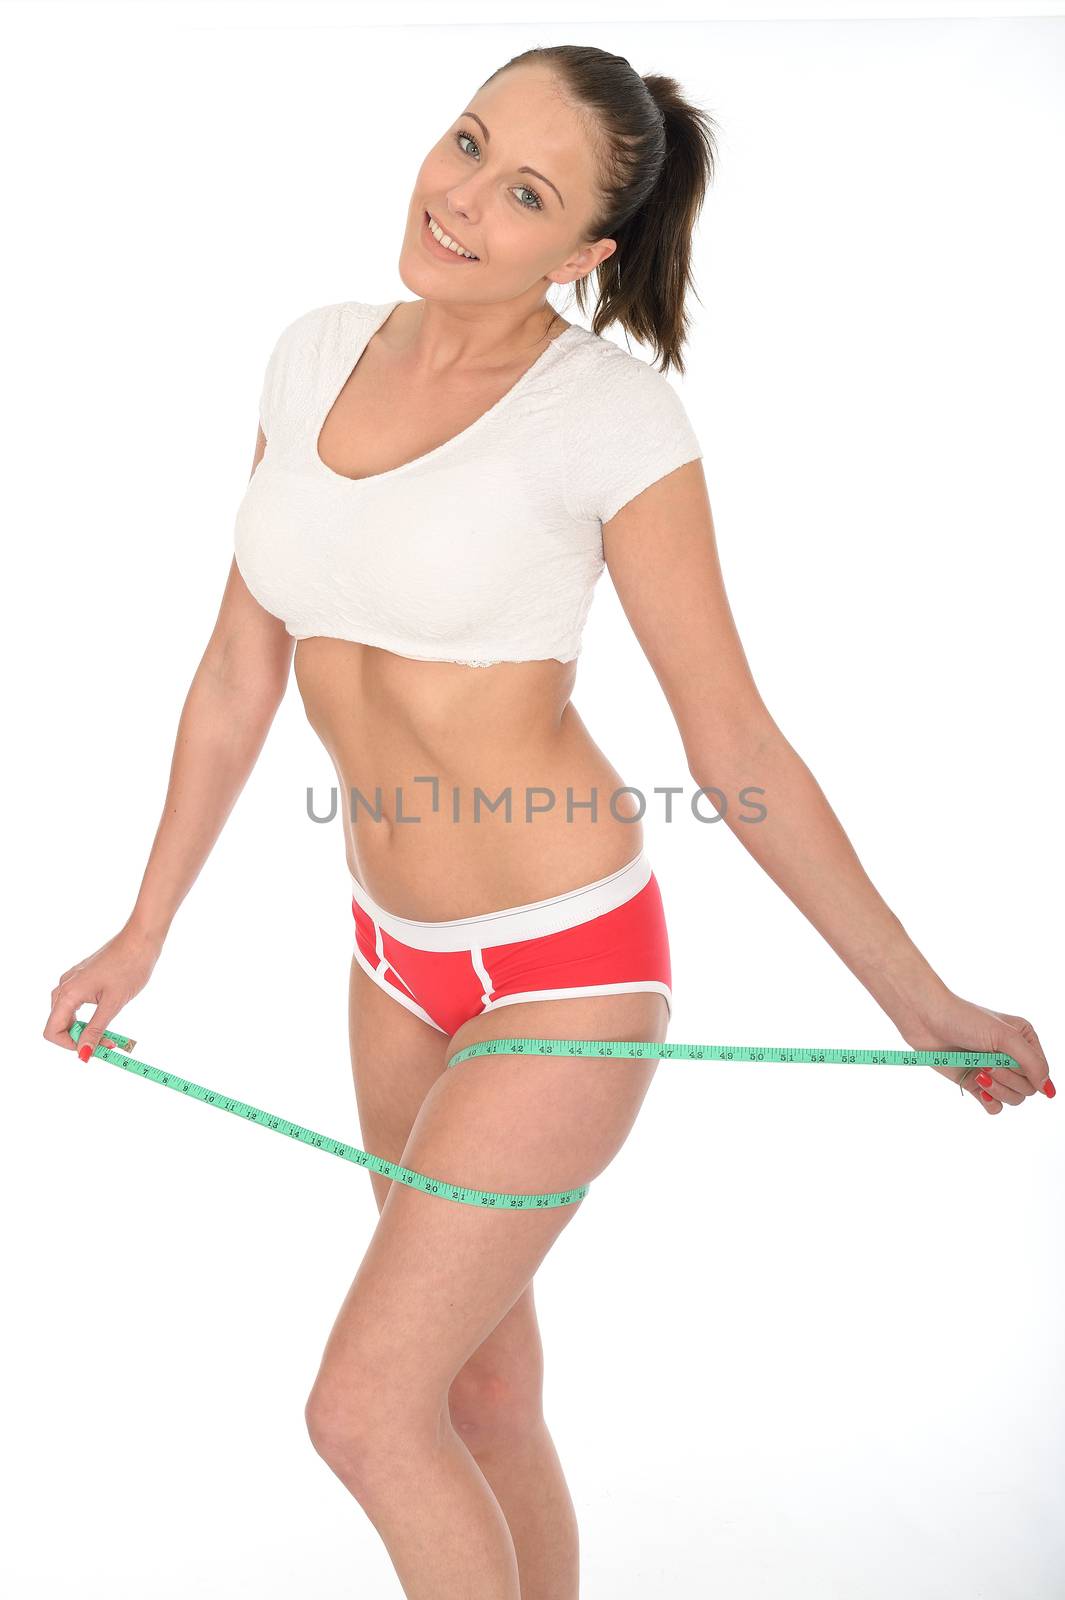 Healthy Fit Young Woman Checking Her Weight Loss With a Tape Measure